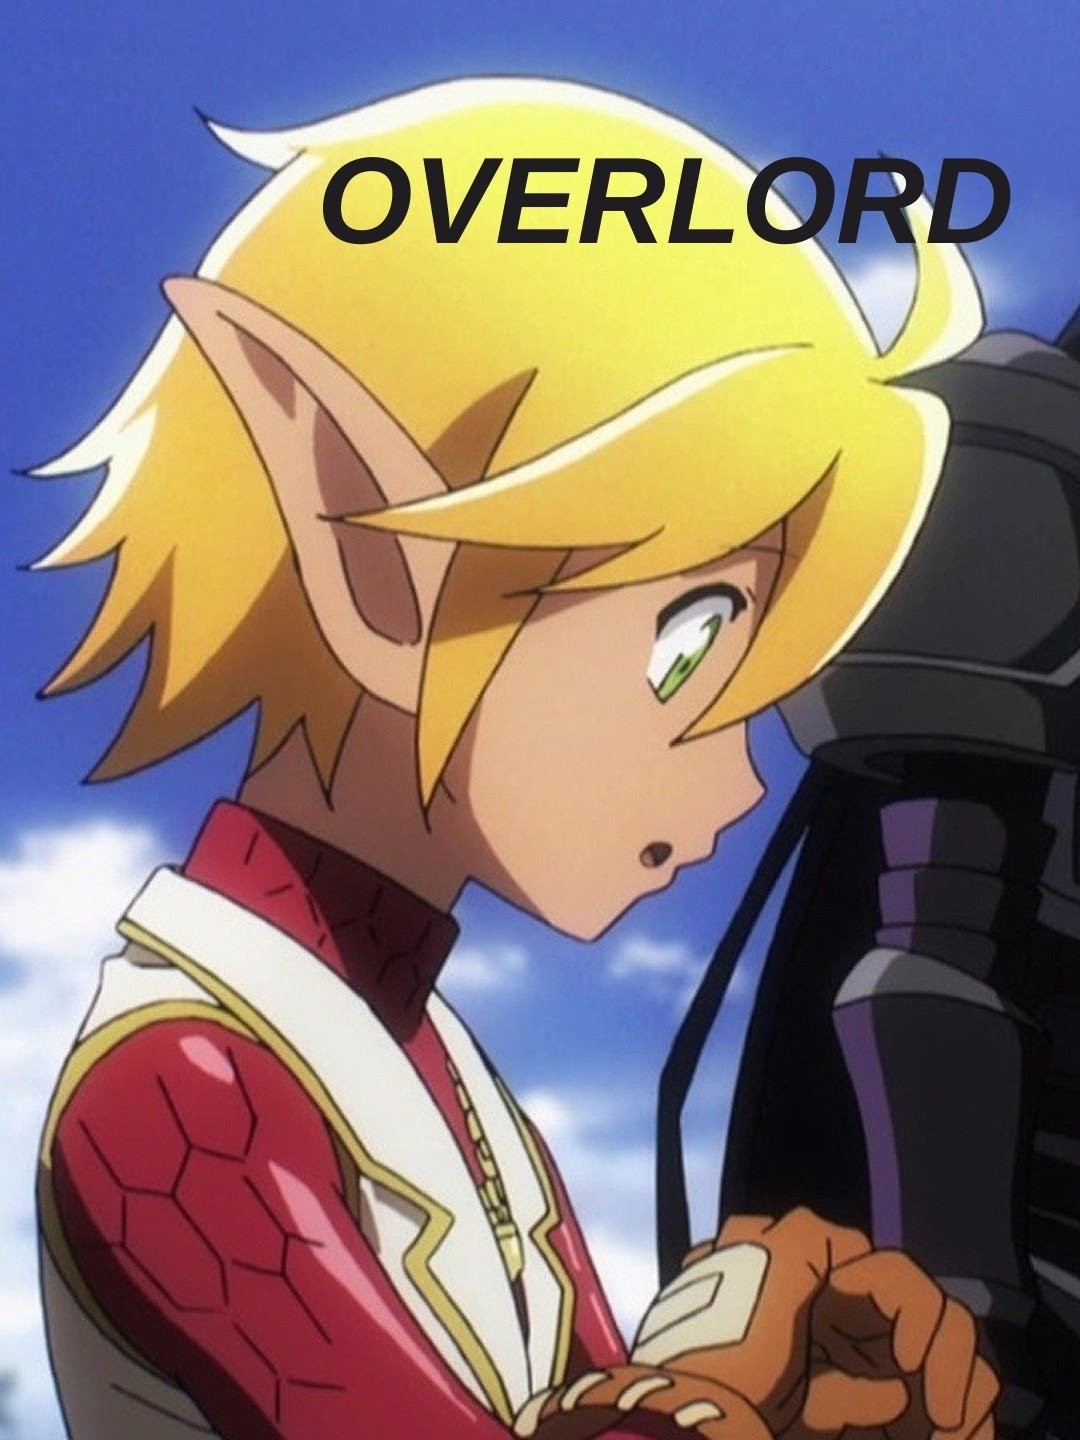 Overlord - Have you seen the 3rd episode of Overlord II? What're your  thoughts on it? Are you glad to see more Ainz?